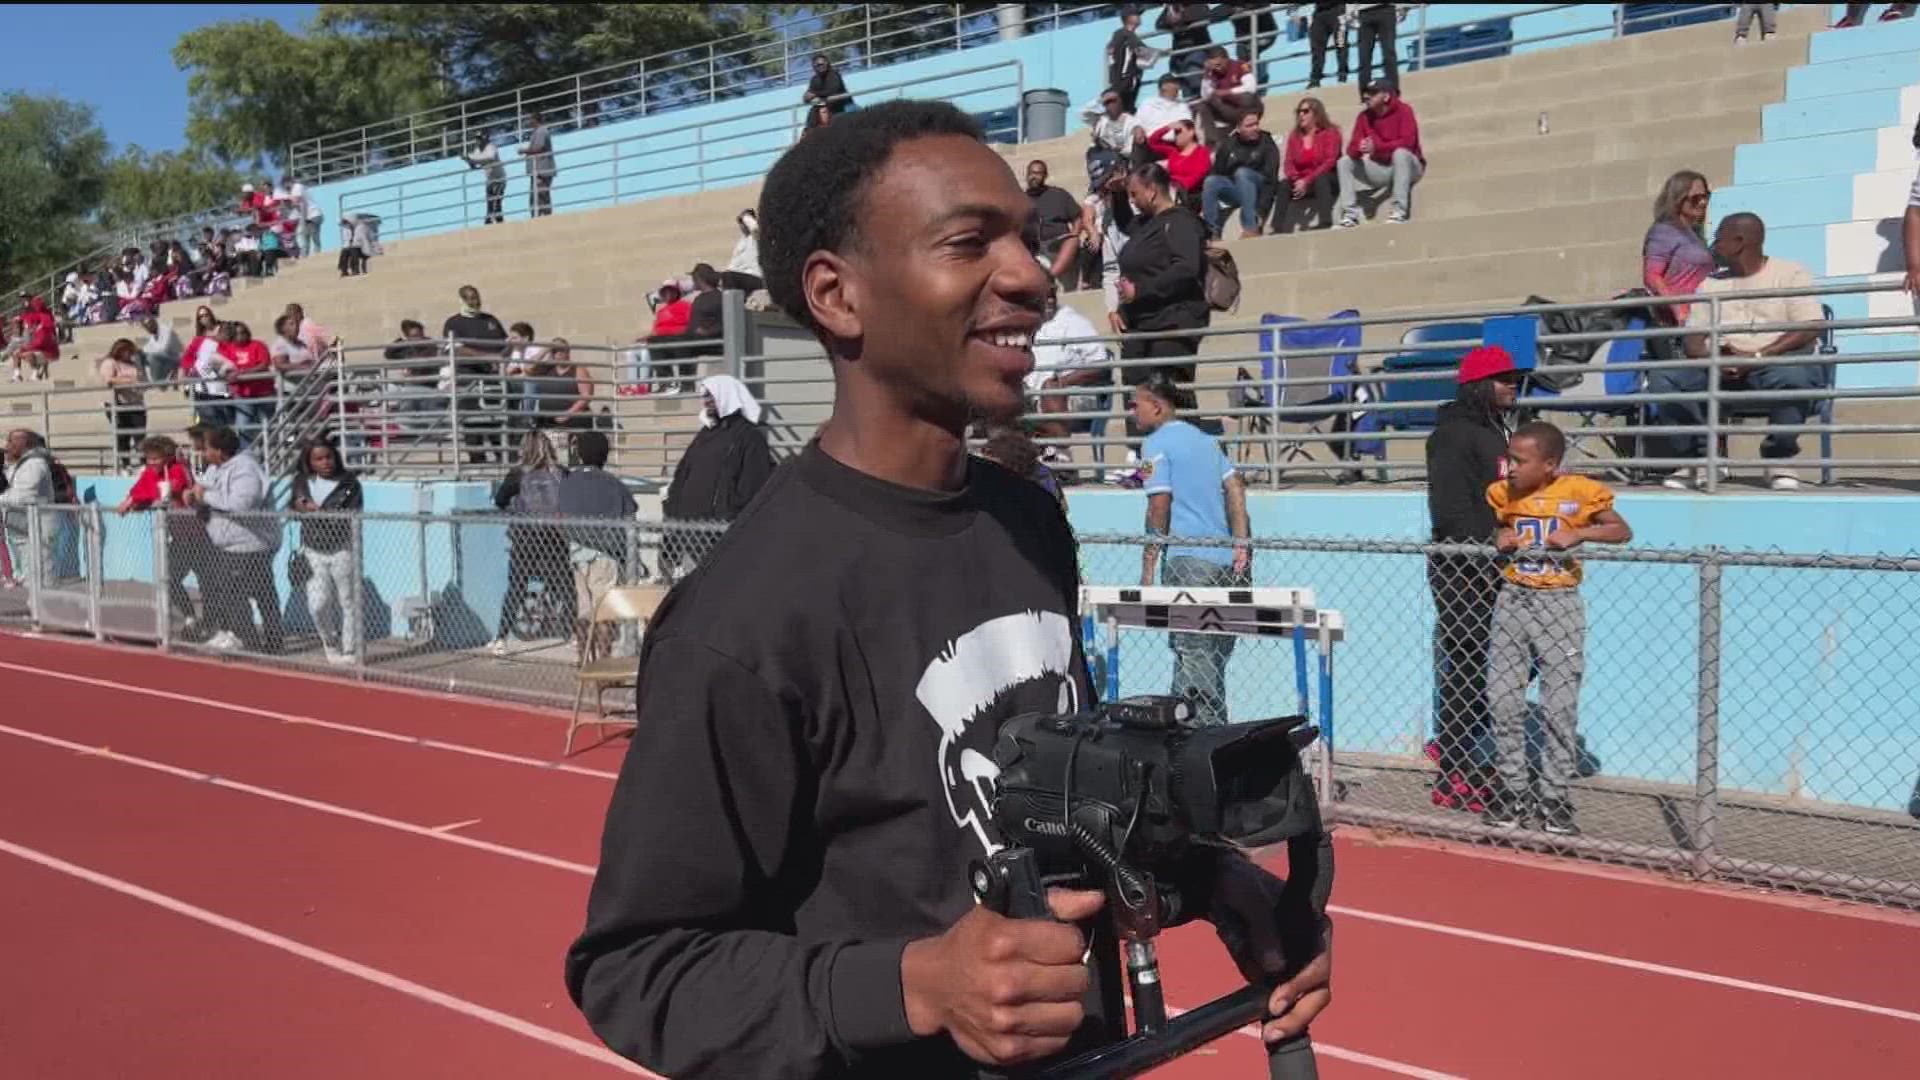 "My whole life, I wasn't allowed to touch a $1,000 camera or a $3,000 camera. I wasn't taught how to use these things," said Jaden Mills, from southeast San Diego.